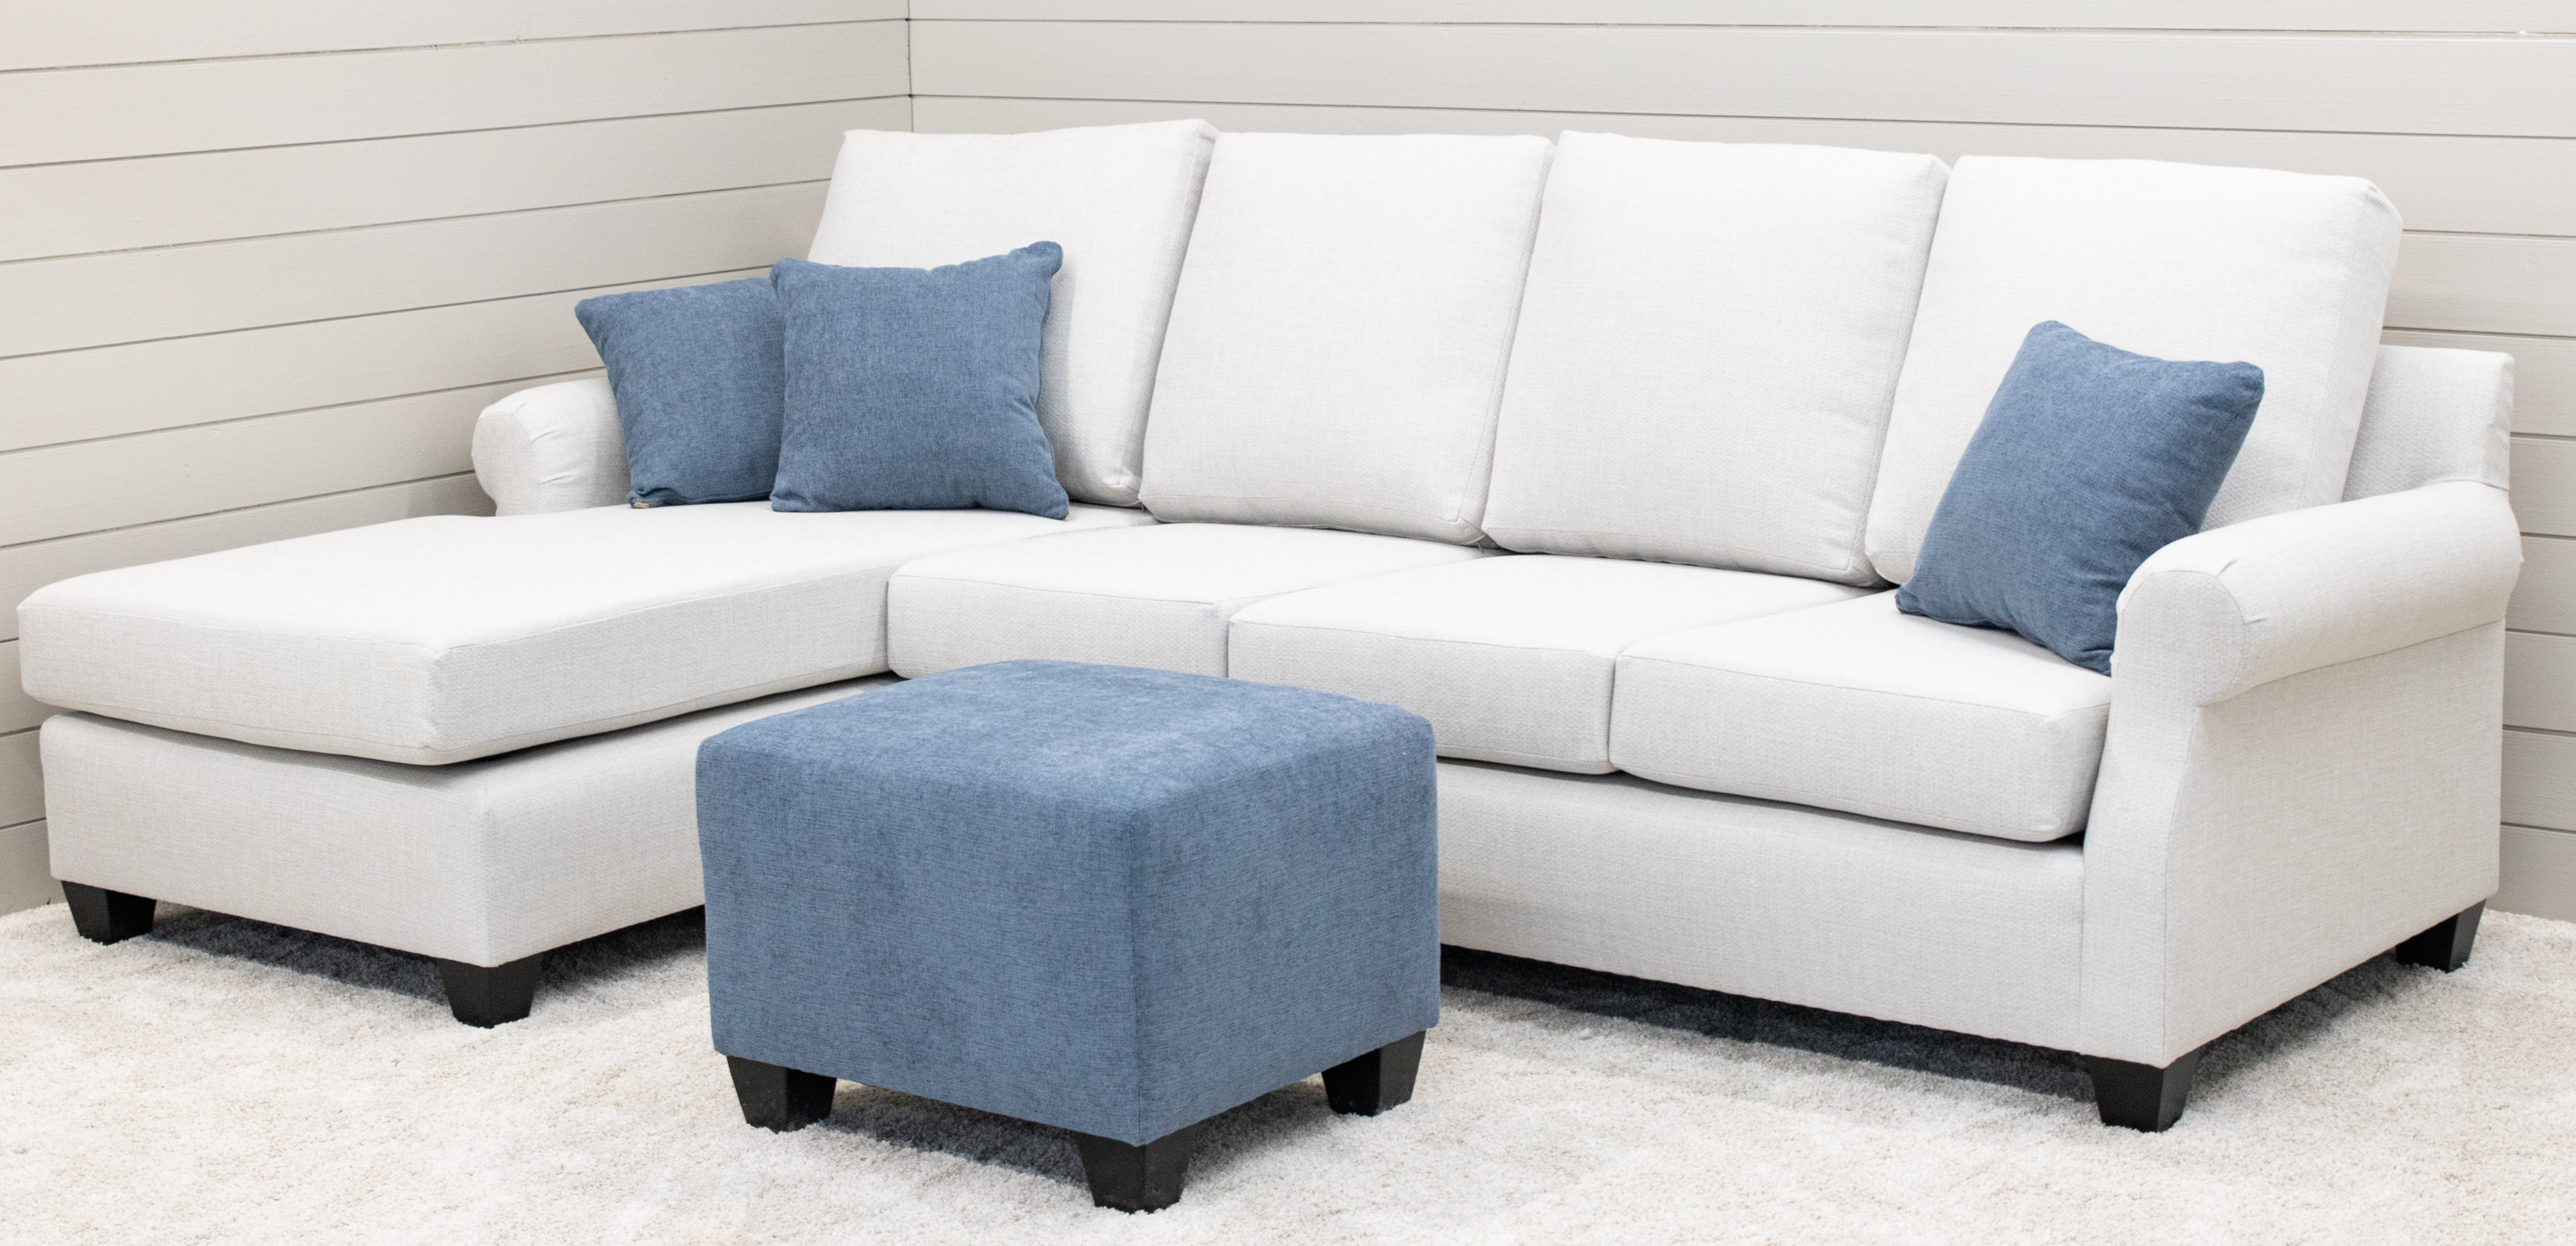 Anaheim Casual Upholstery Furniture